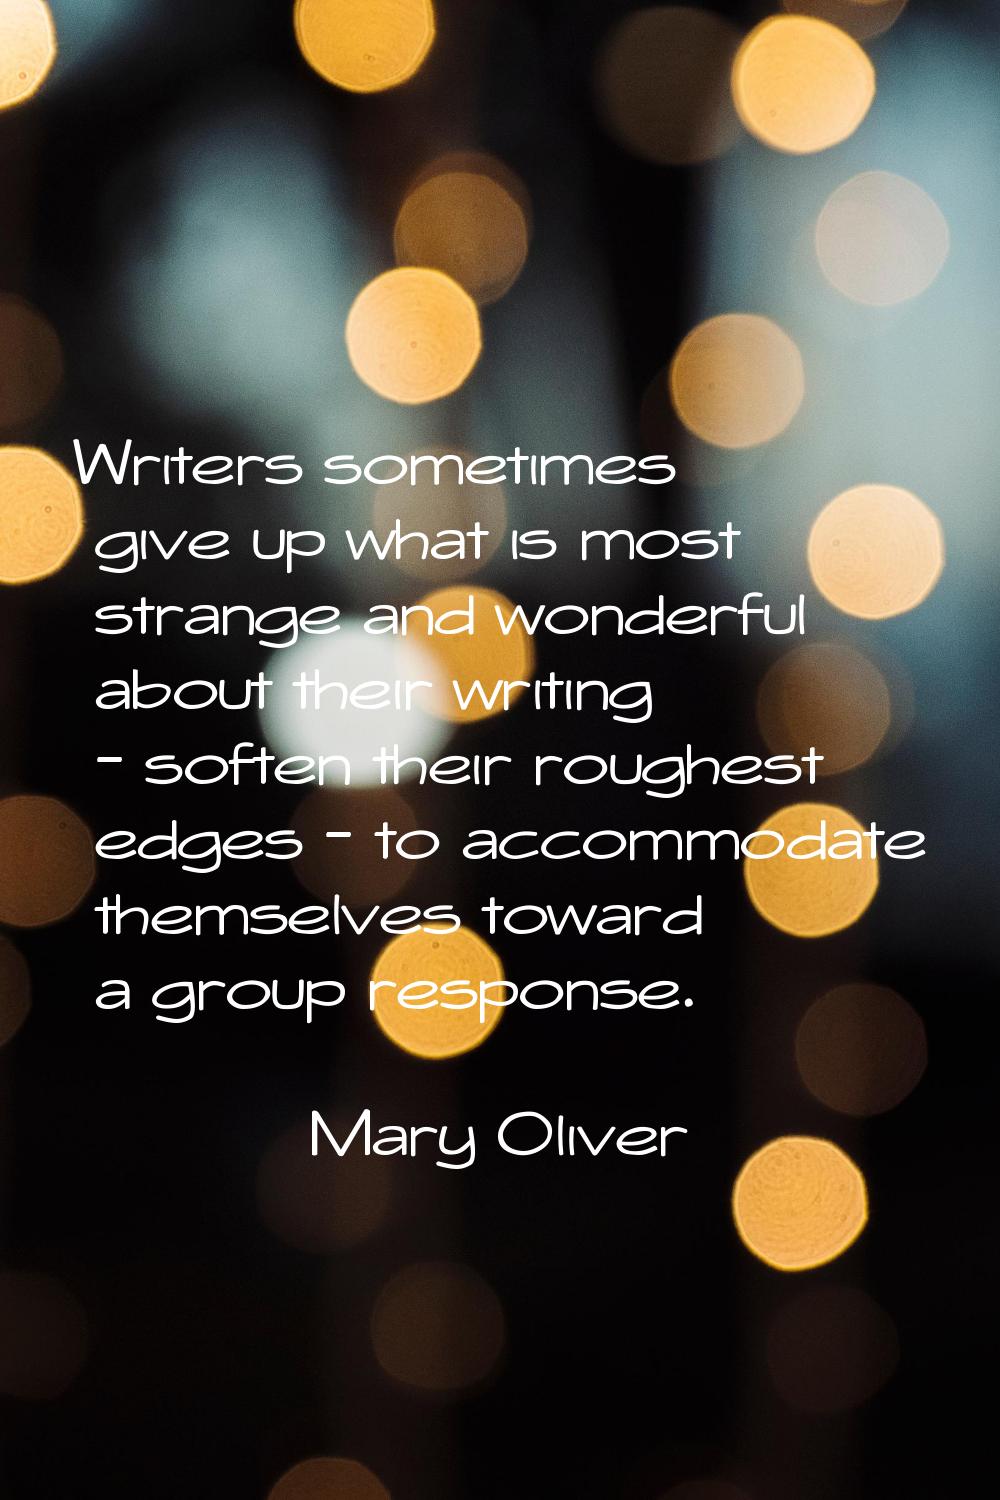 Writers sometimes give up what is most strange and wonderful about their writing - soften their rou